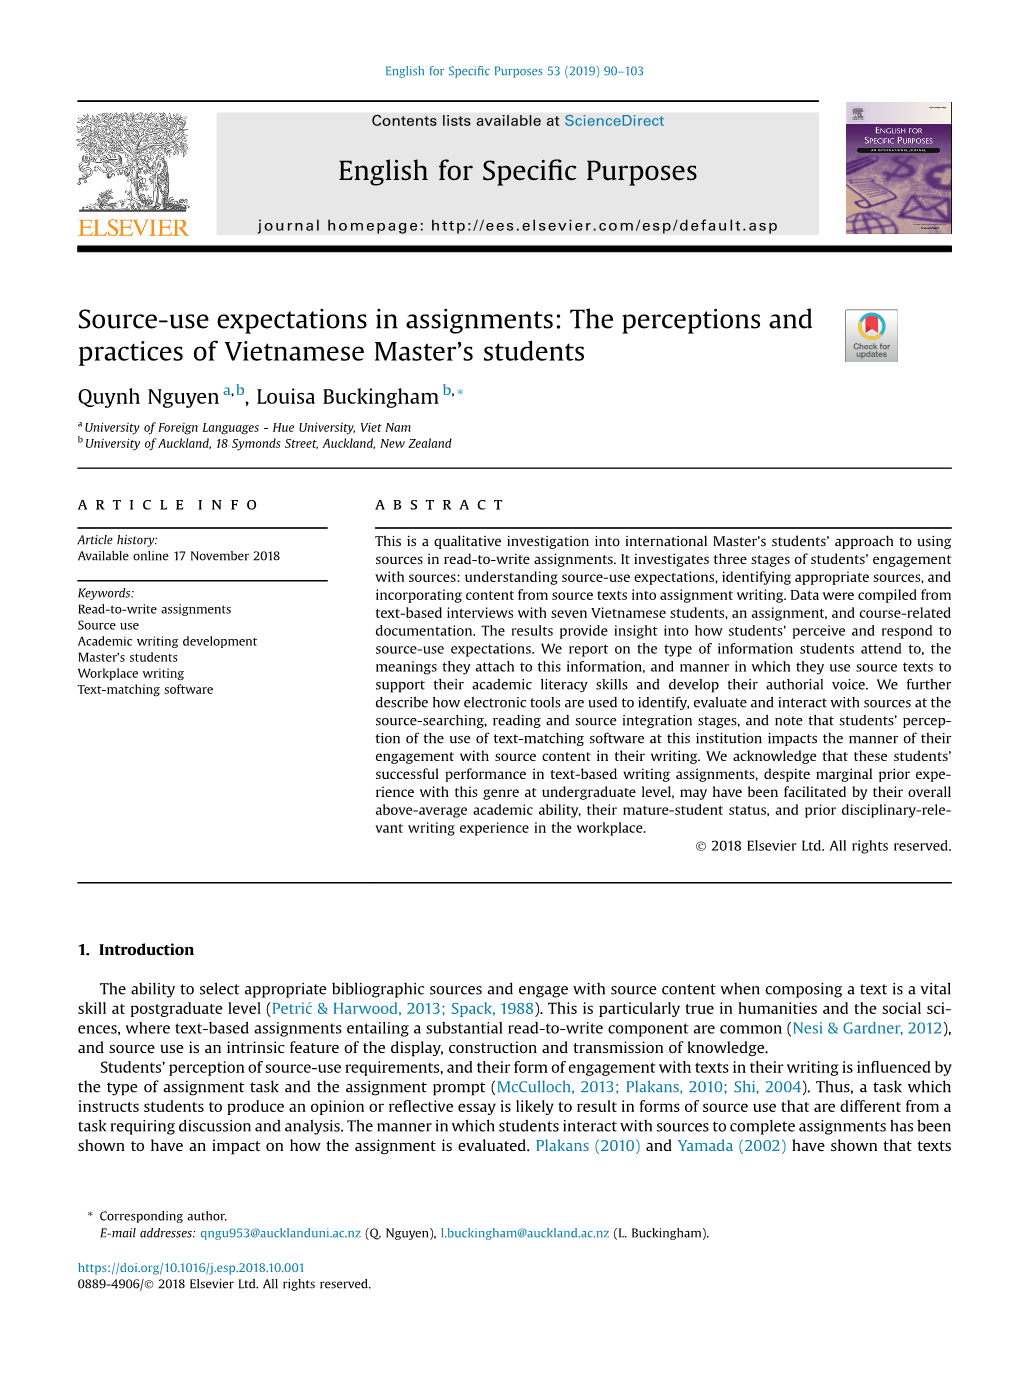 Source-Use Expectations in Assignments: the Perceptions and Practices of Vietnamese Master’S Students